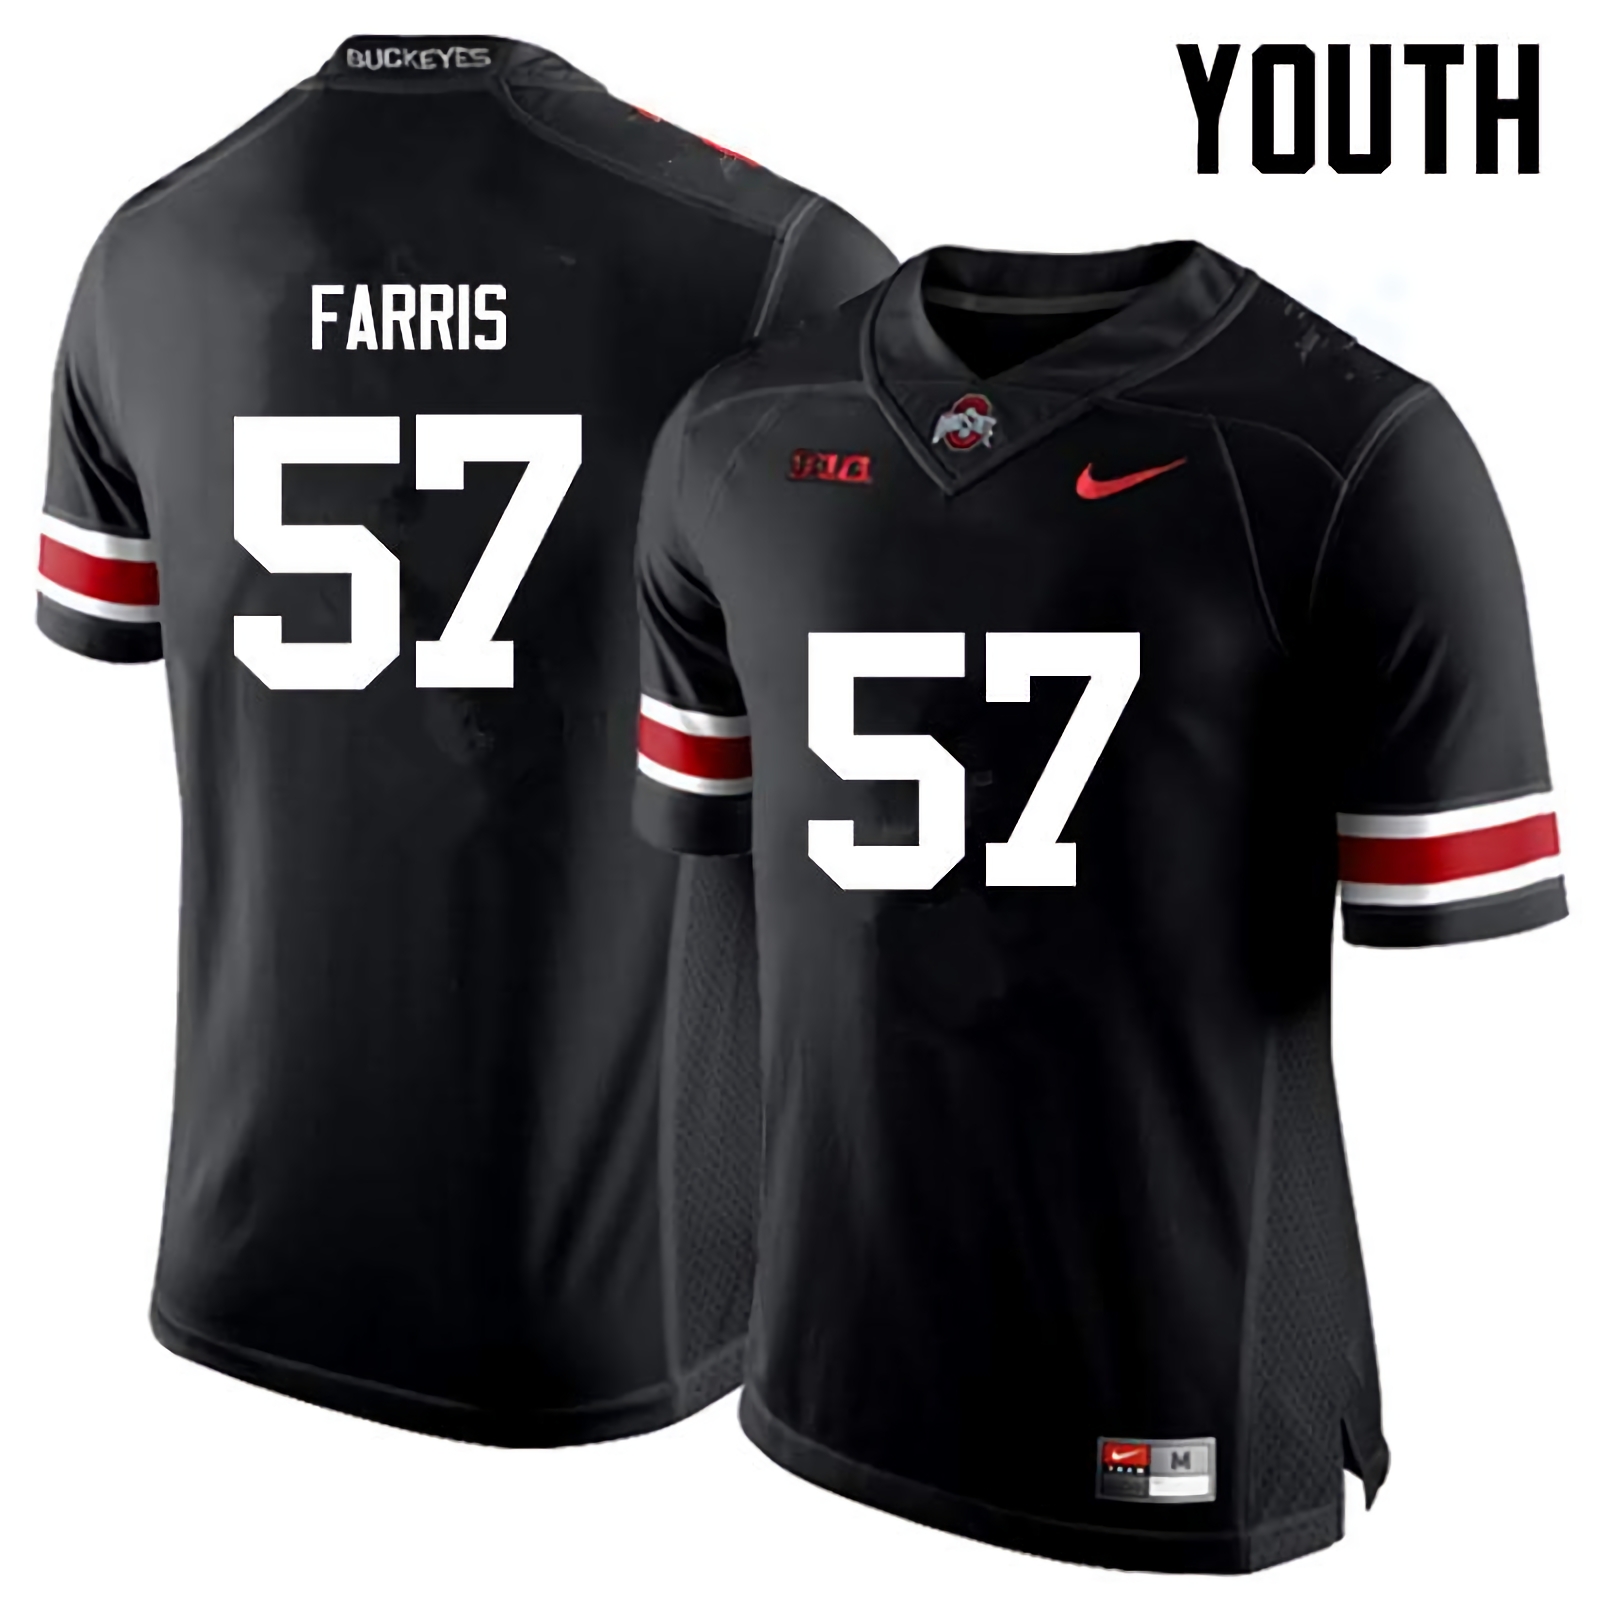 Chase Farris Ohio State Buckeyes Youth NCAA #57 Nike Black College Stitched Football Jersey WWI6456TL